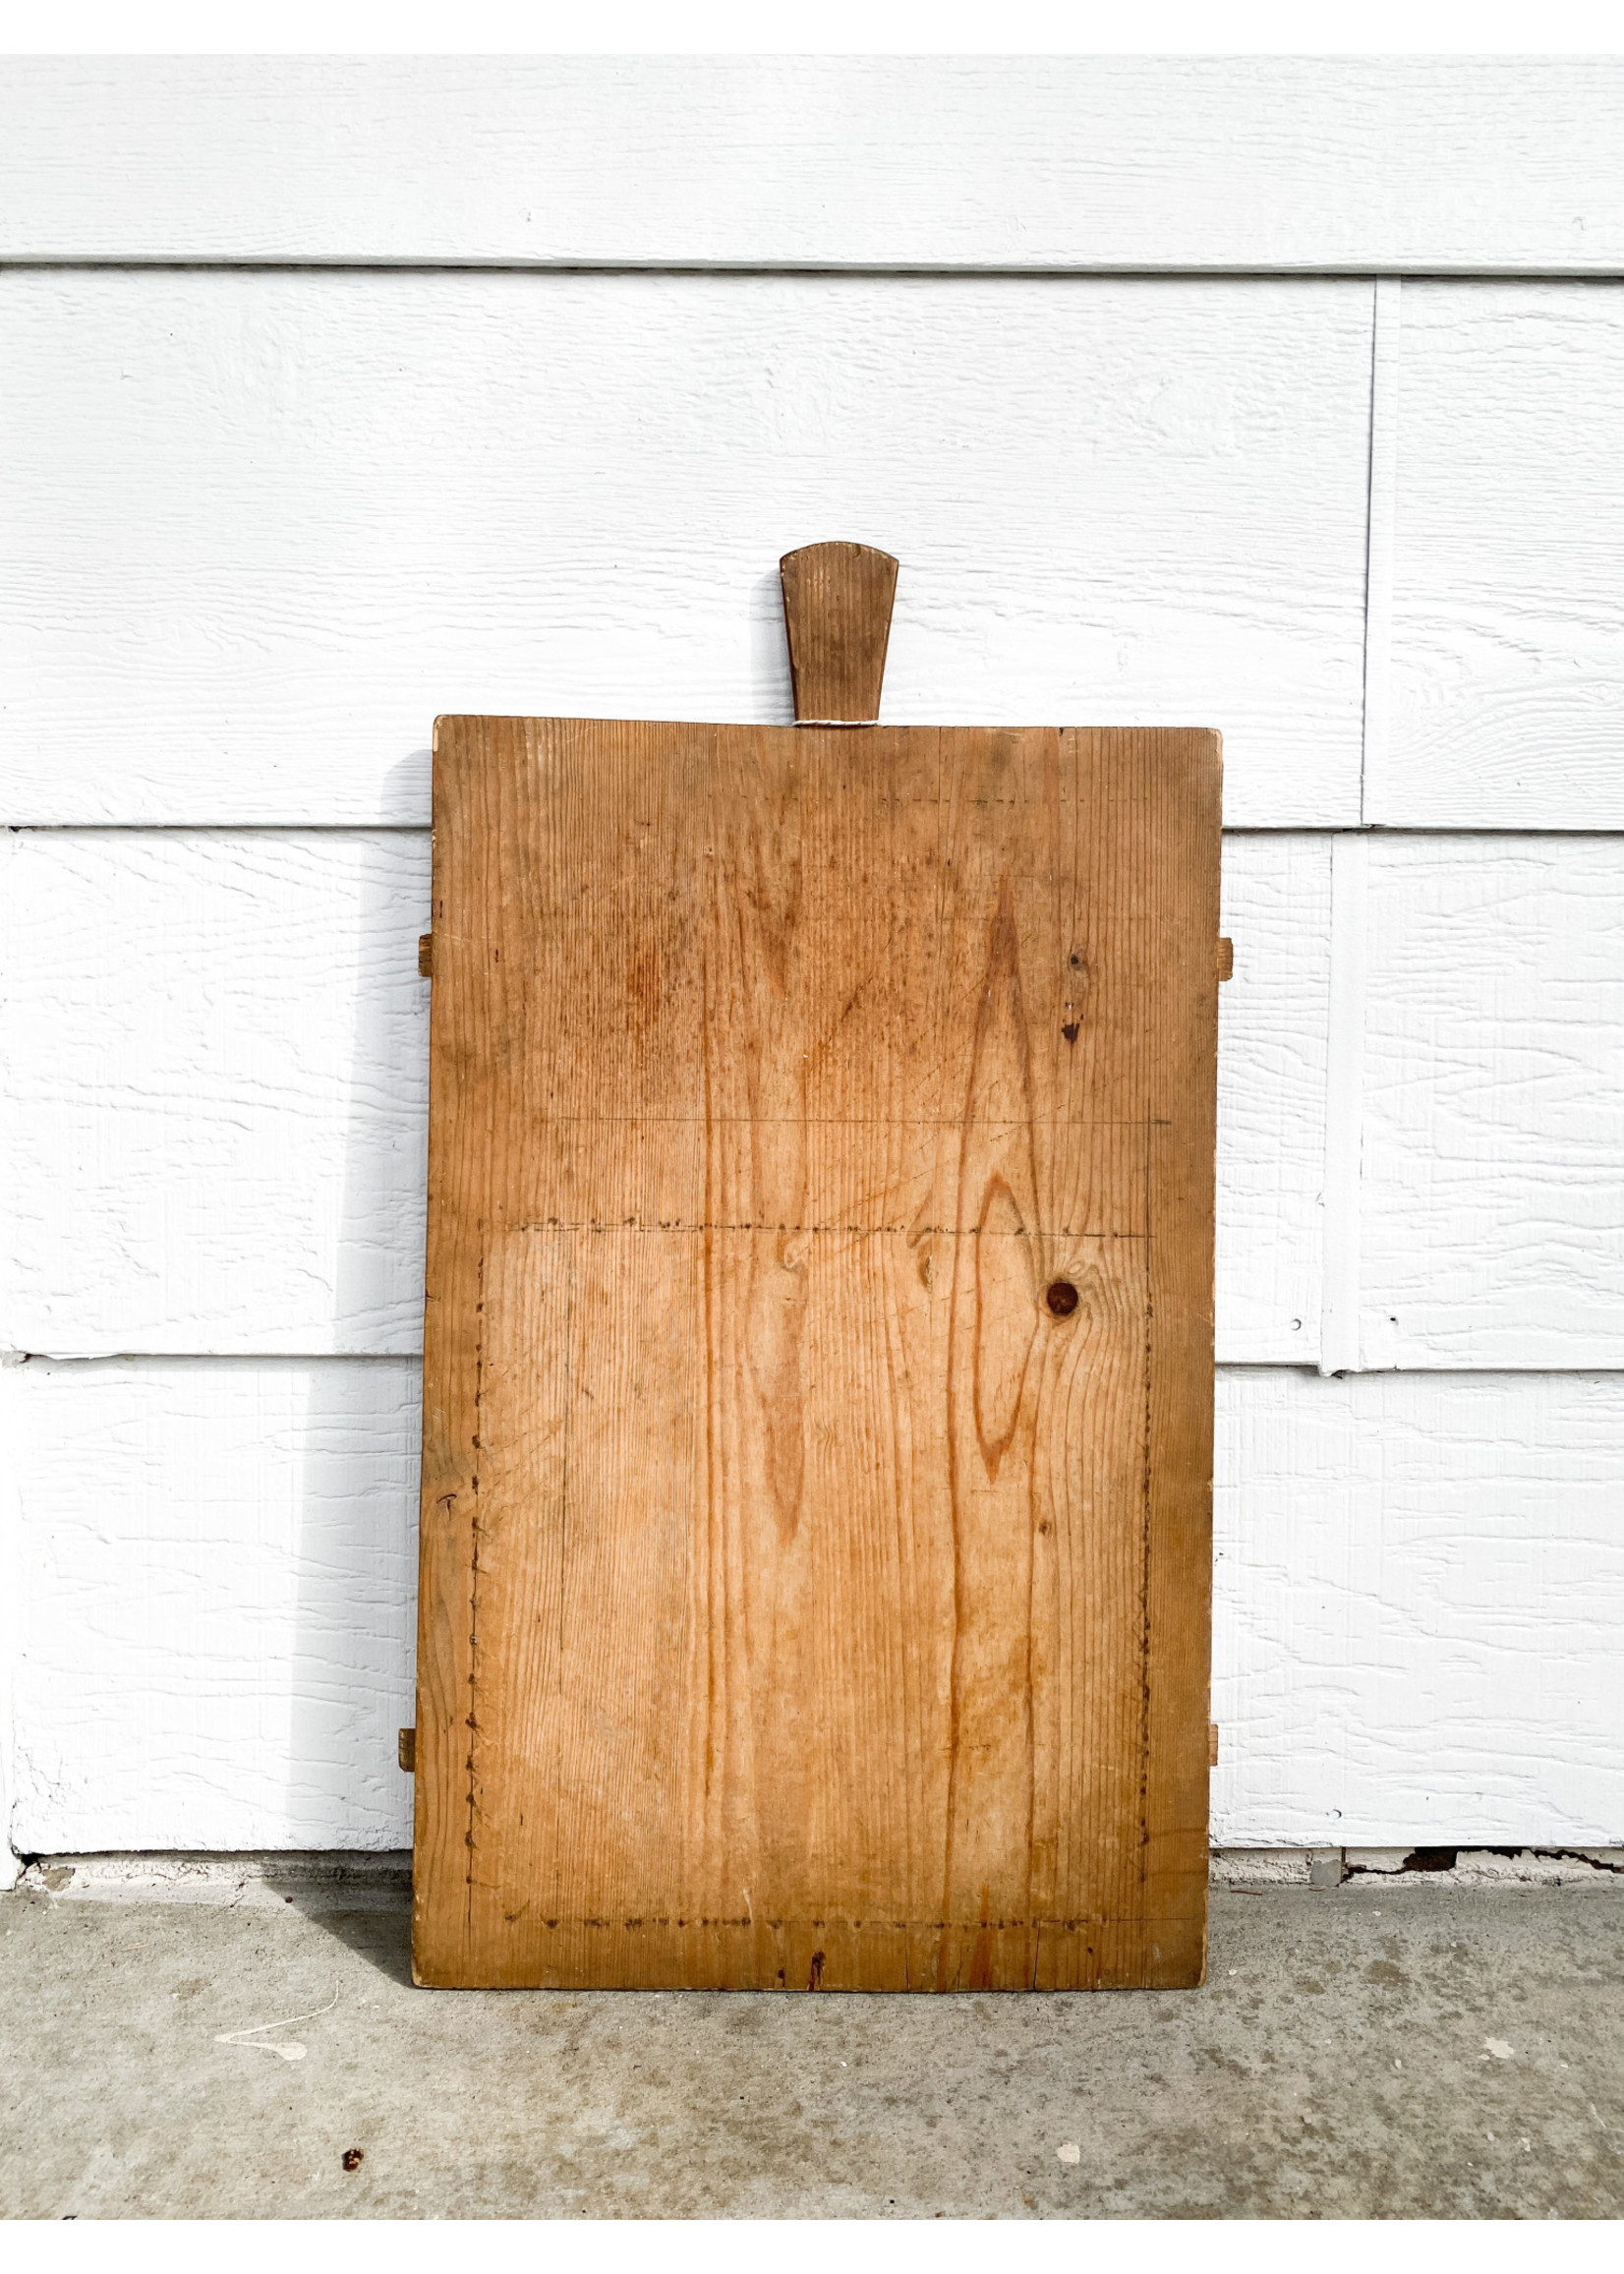 Antique Cutting Boards from Germany circa 1870